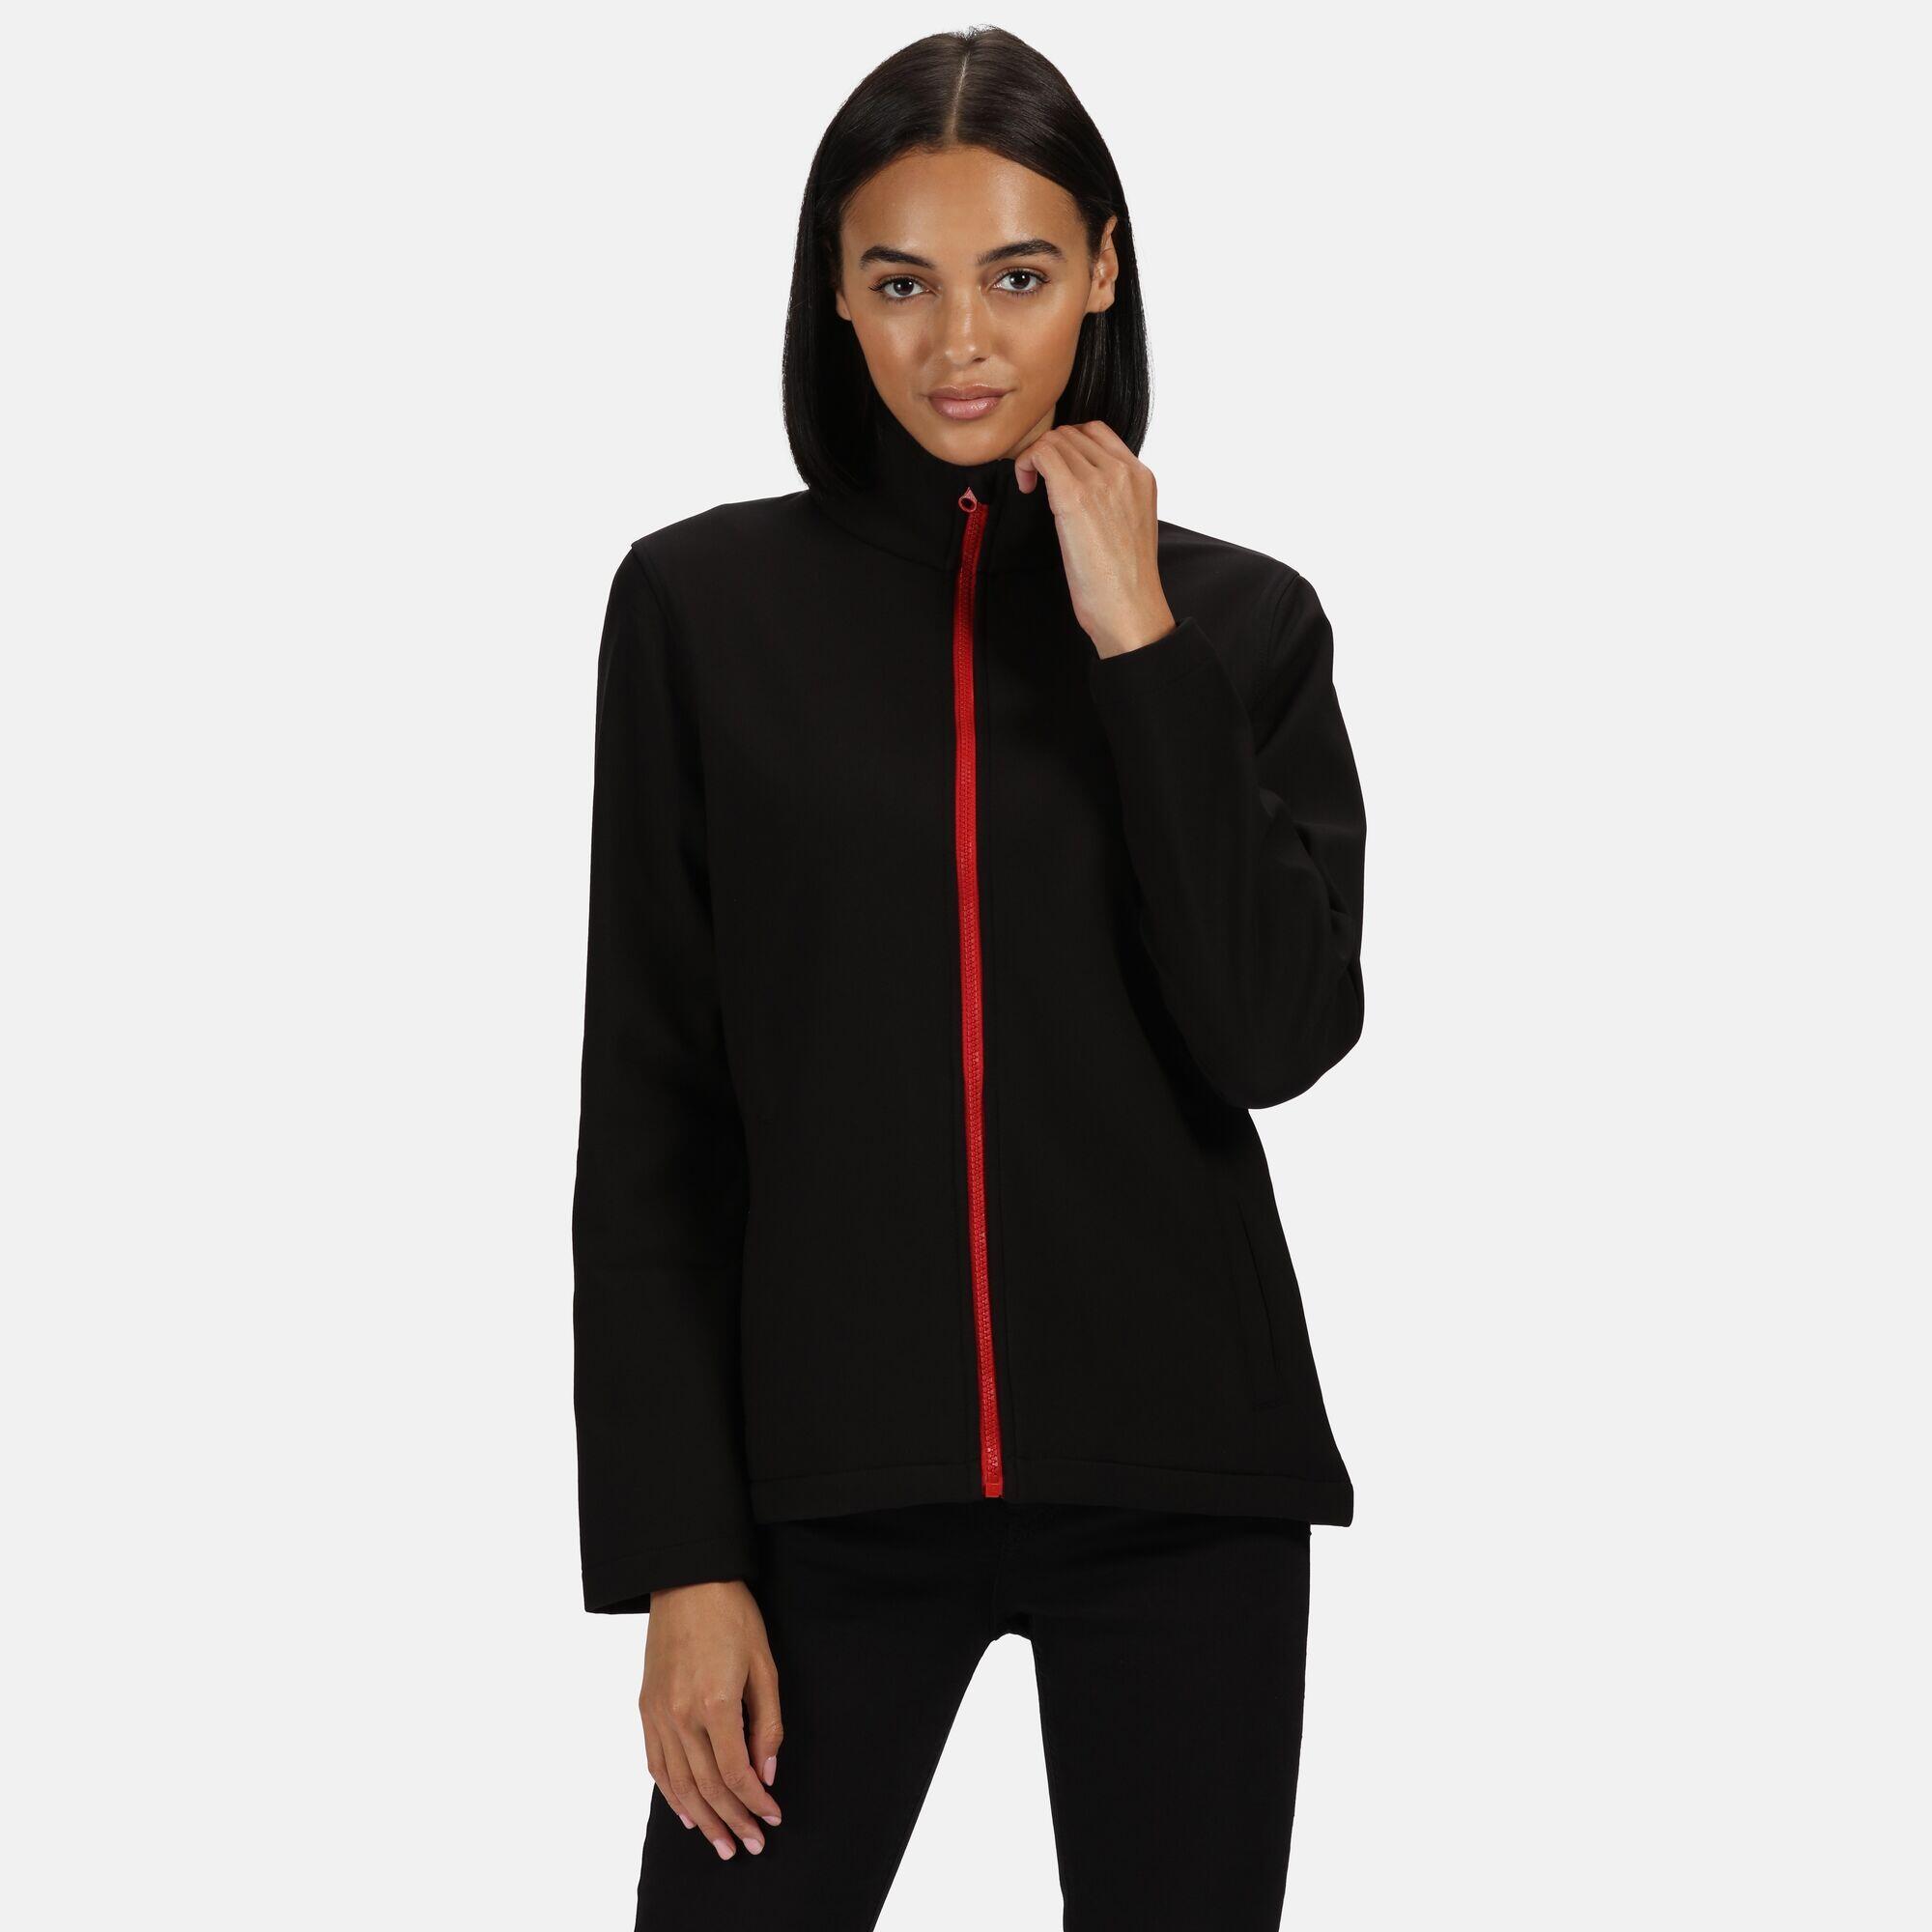 Standout Womens/Ladies Ablaze Printable Soft Shell Jacket (Black/Classic Red) 4/5